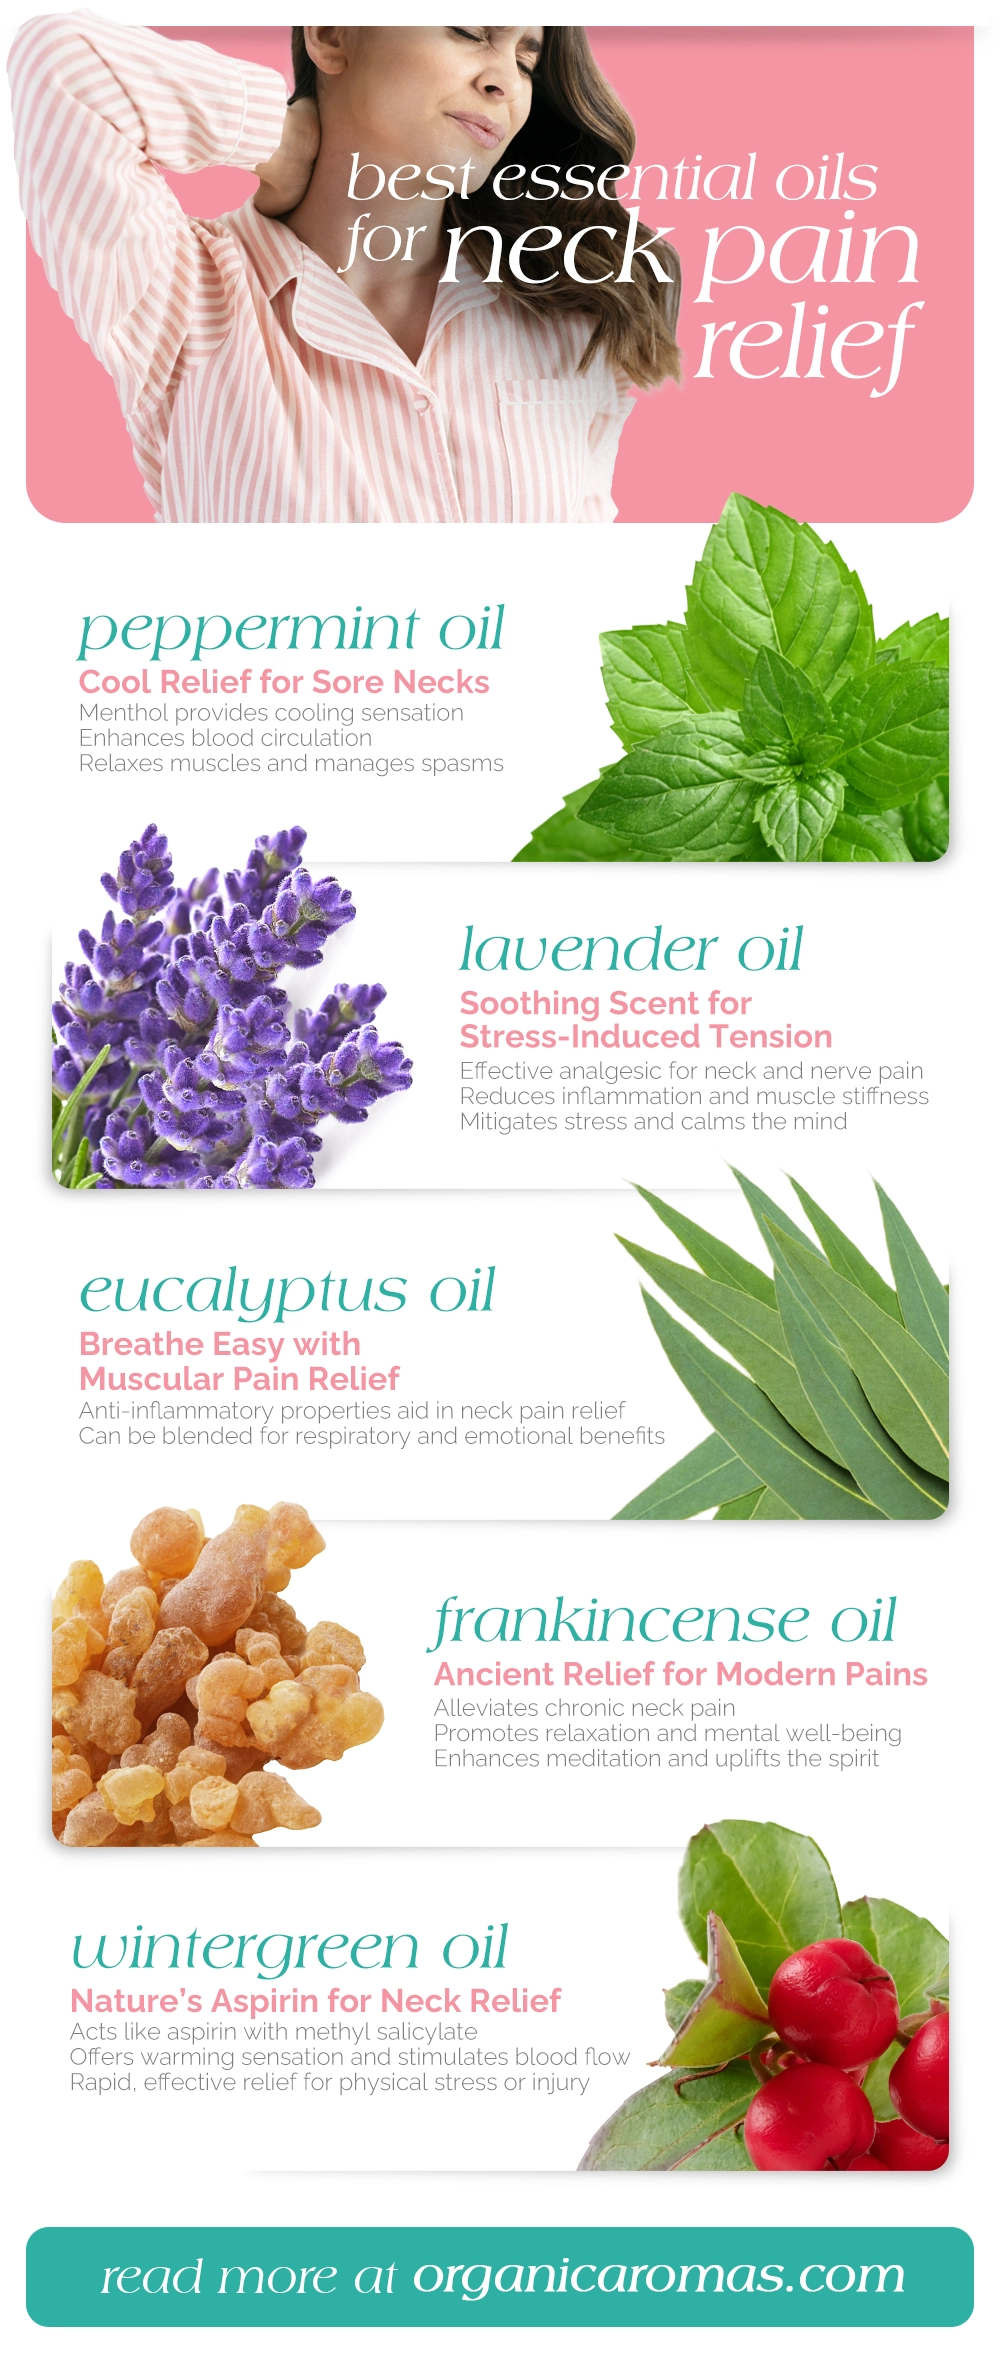 Best Essential Oils for Neck Pain Relief Infographic by Organic Aromas